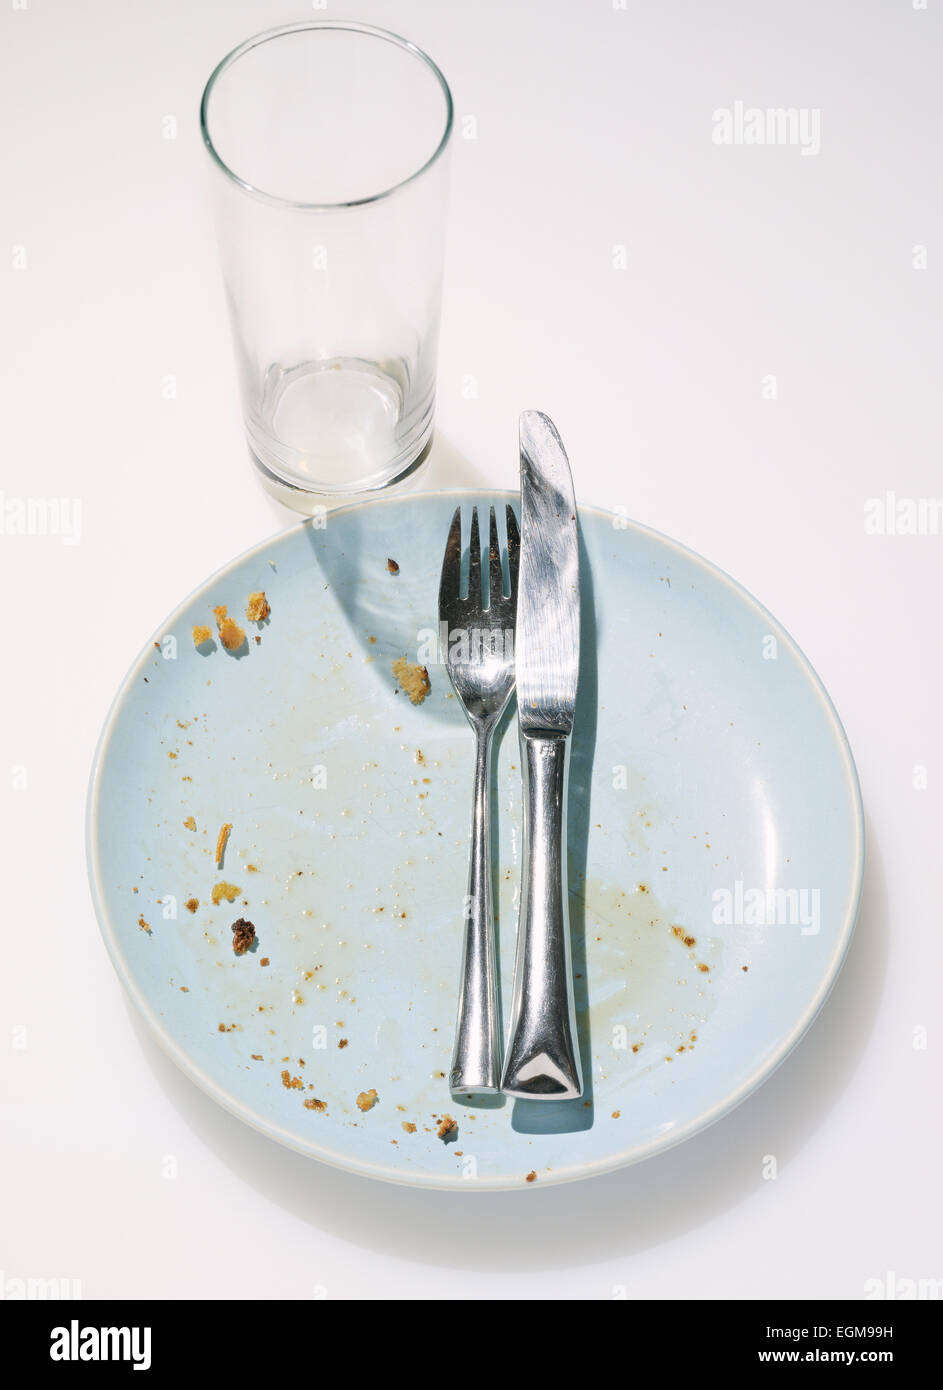 Crumbs and Silverware on Dirty Plate Stock Photo